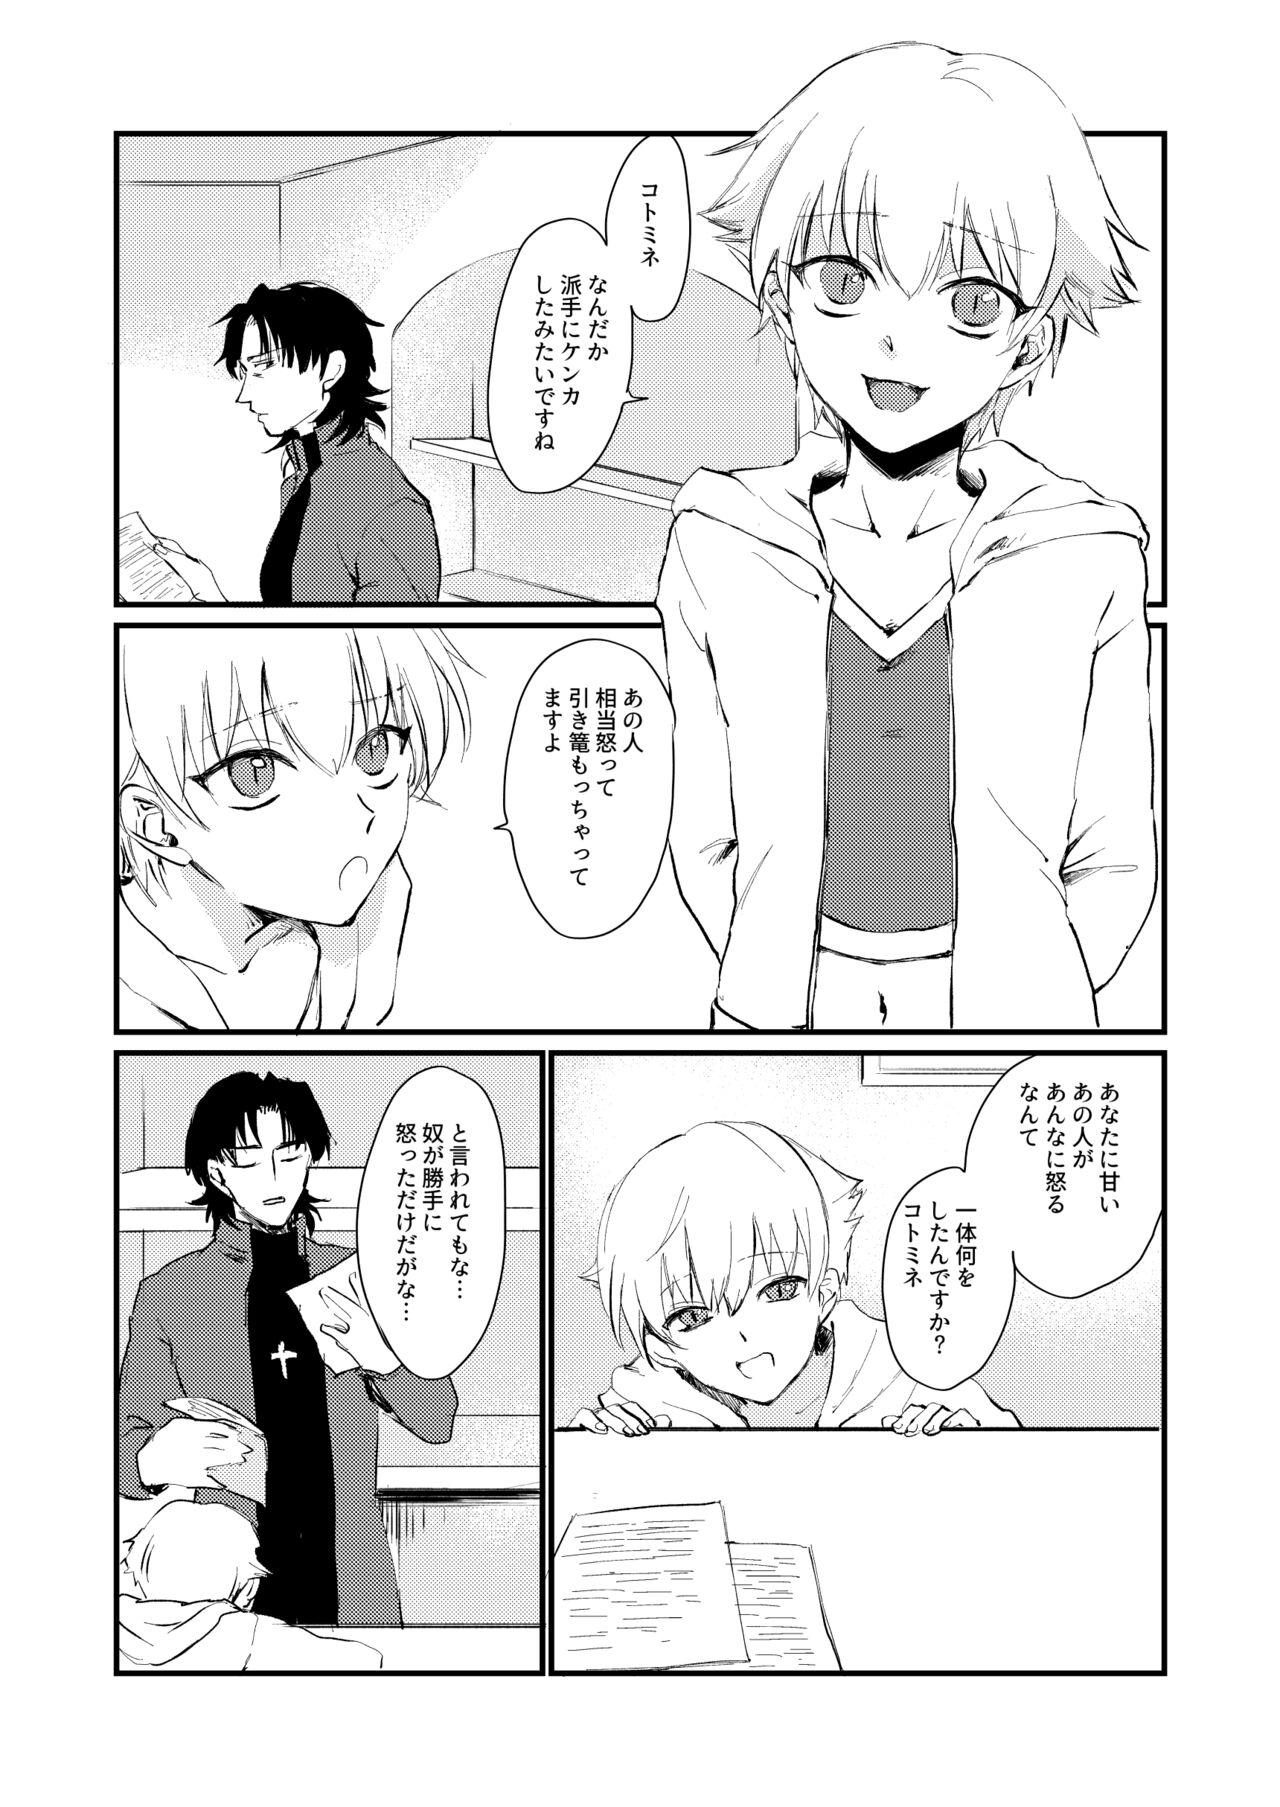 Petite Teenager ARE YOU KIDDING? - Fate zero Studs - Page 2